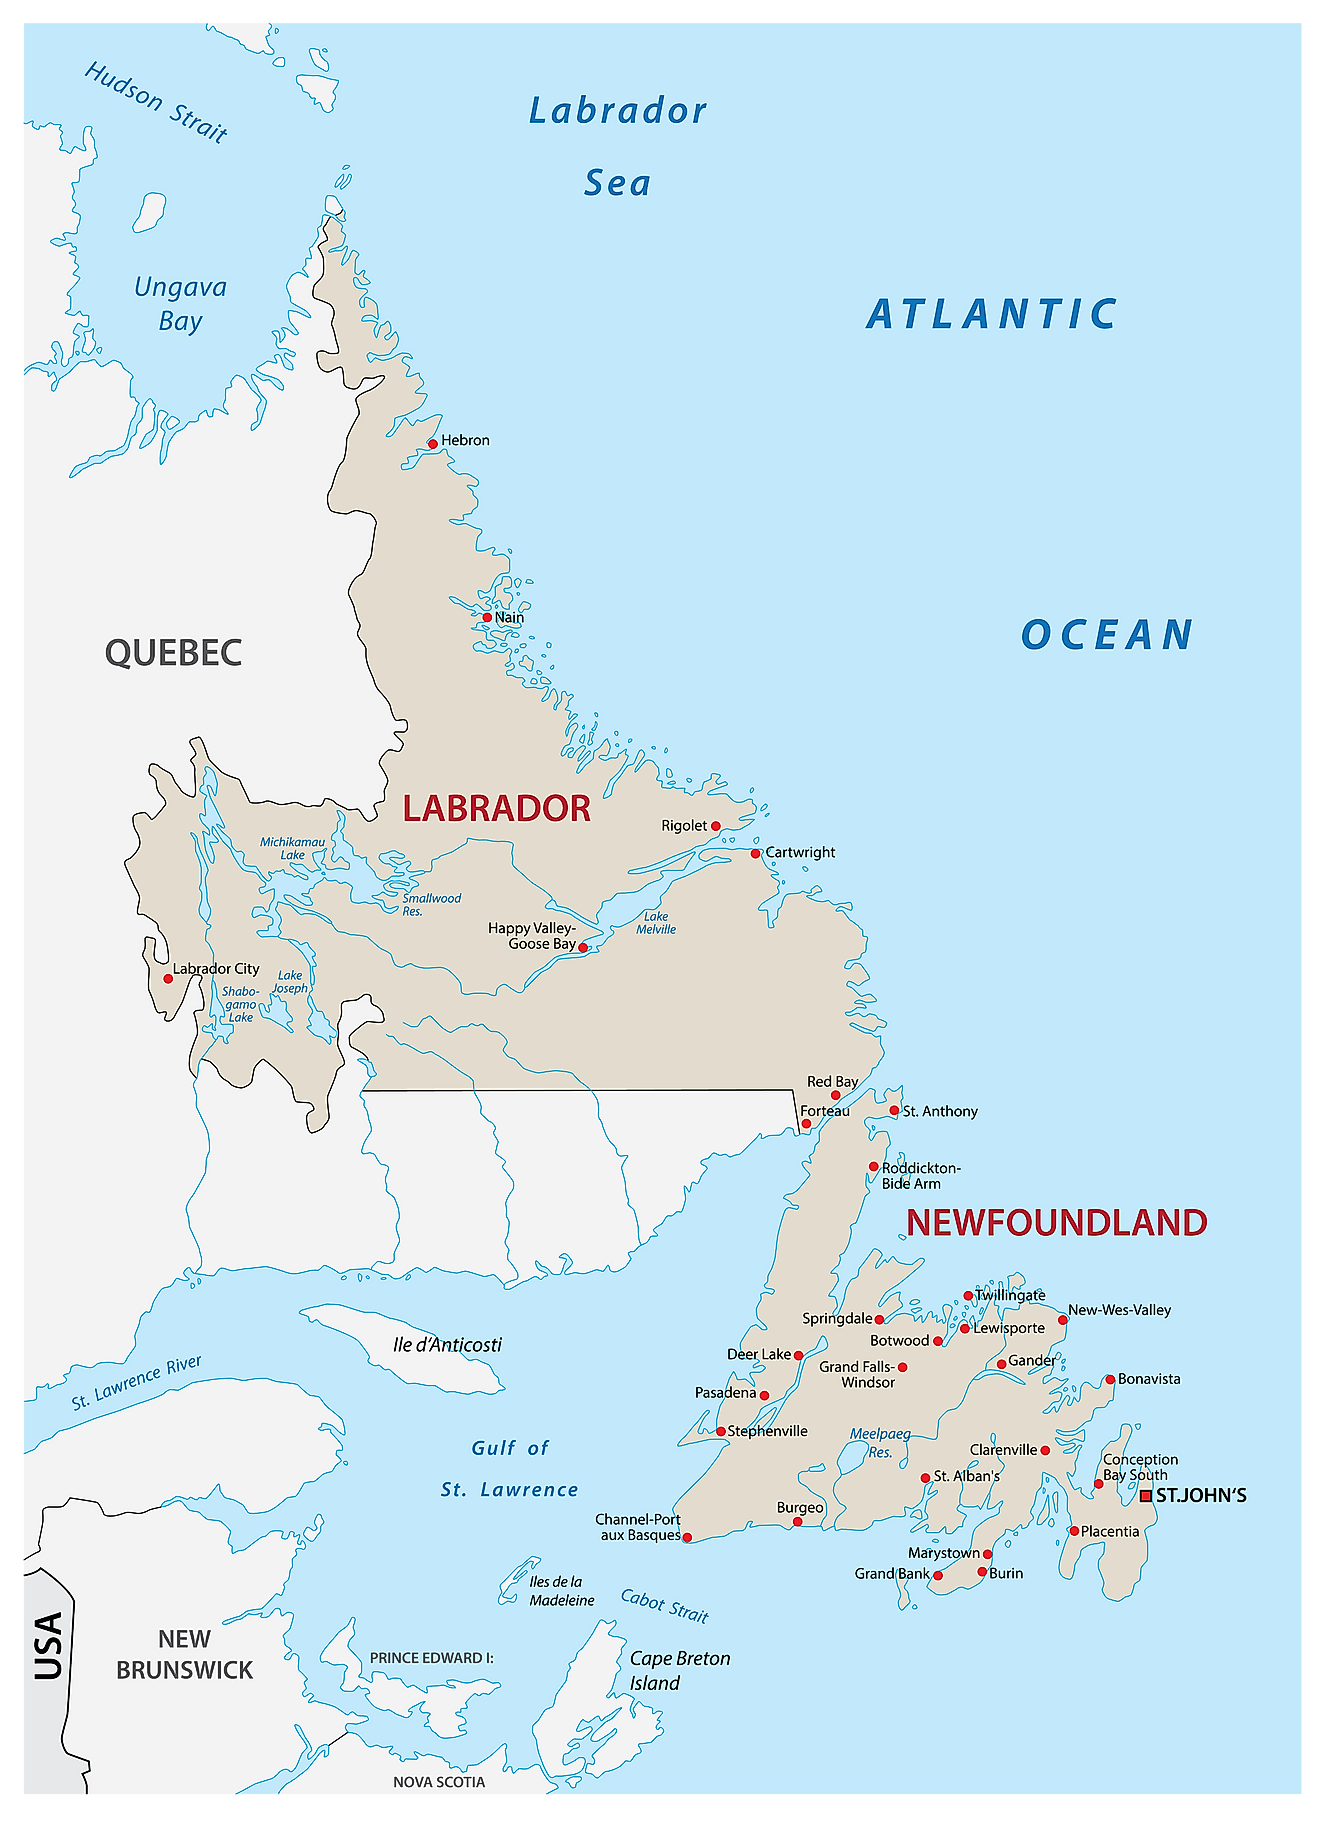 Administrative Map of Newfoundland and Labrador showing its cities/towns and its capital city - St. John's. 